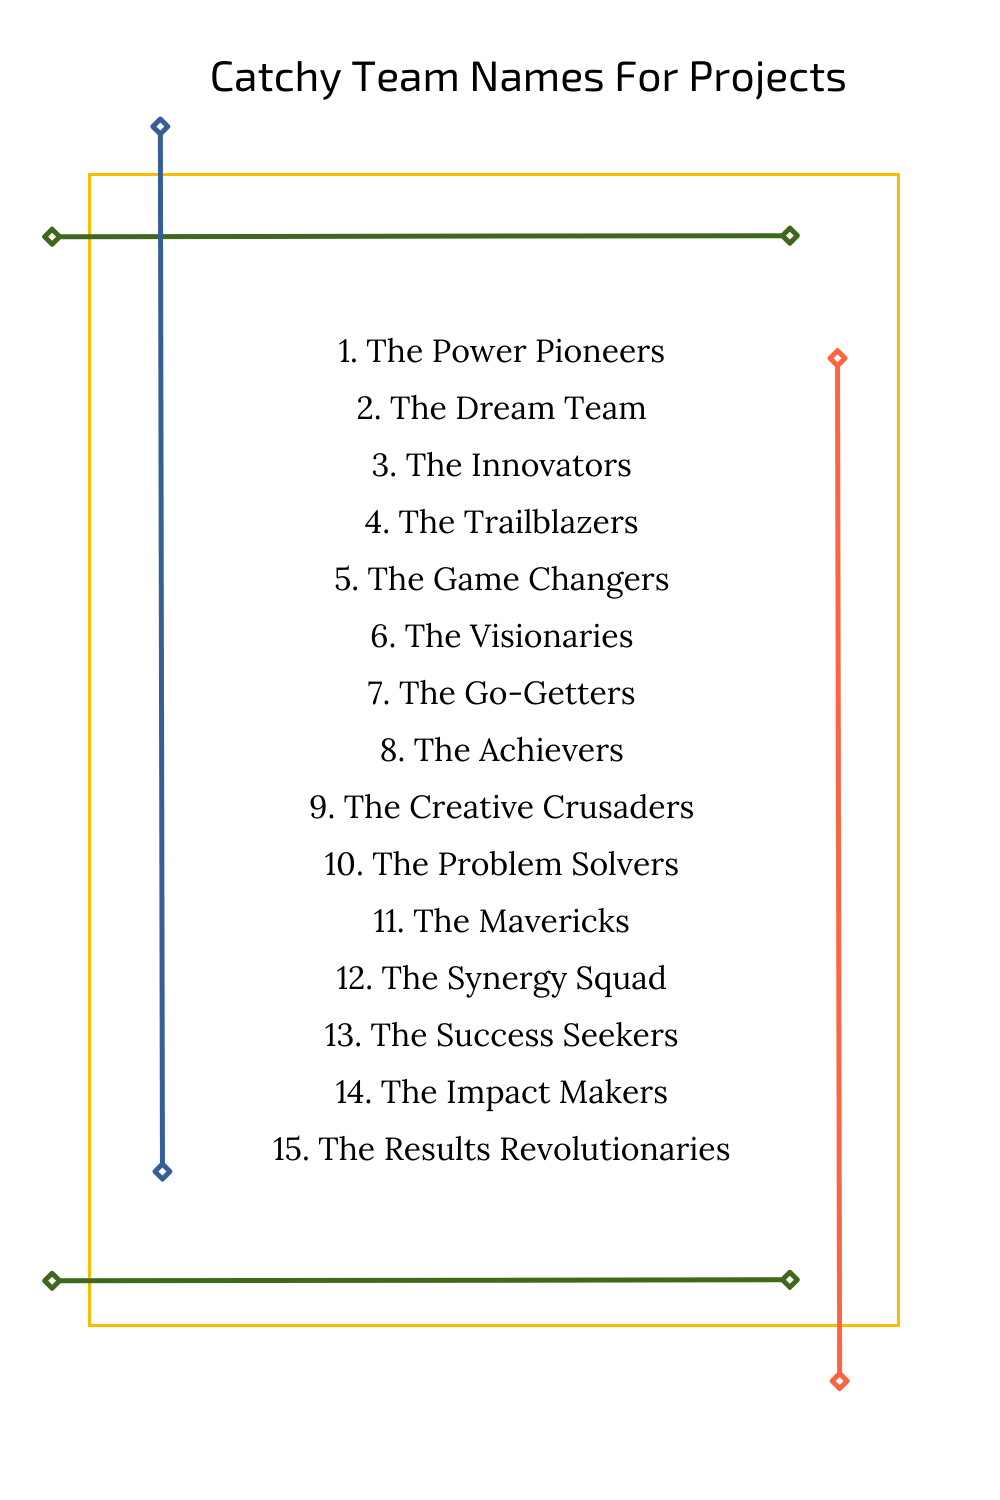 Catchy Team Names For Projects